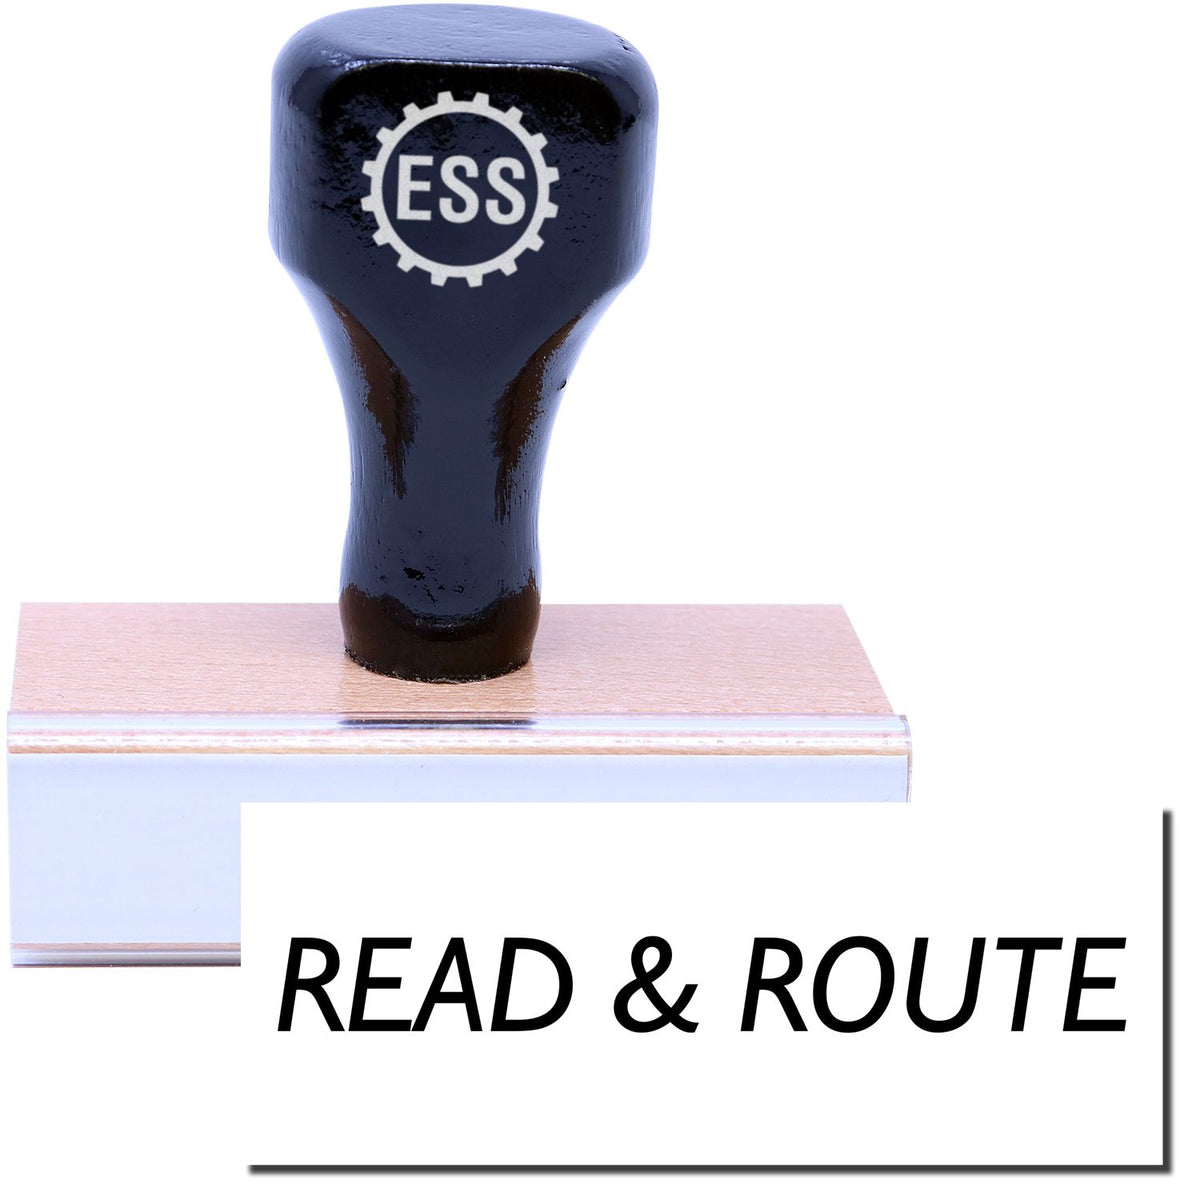 A stock office rubber stamp with a stamped image showing how the text &quot;READ &amp; ROUTE&quot; is displayed after stamping.